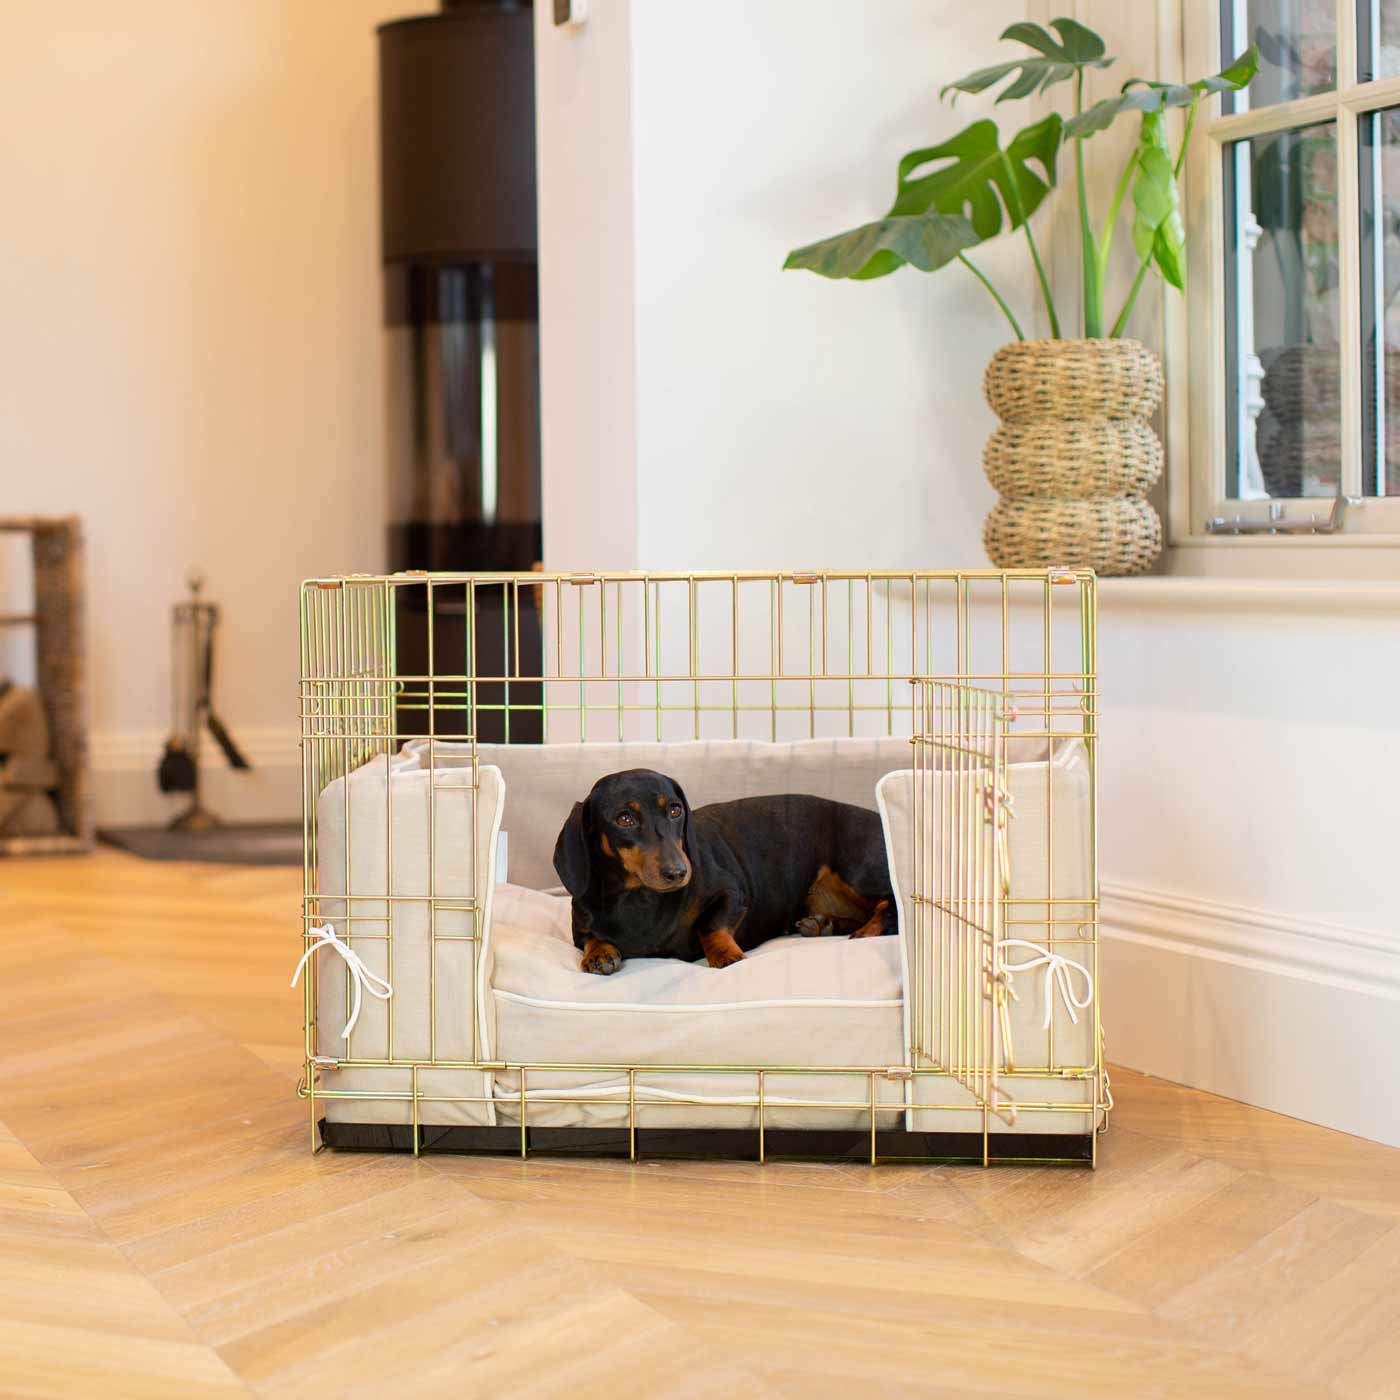 Discover our Luxury Dog Crate Bumper, in Savanna Oatmeal. The Perfect Dog Crate Accessory, Available To Personalise Now at Lords & Labradors